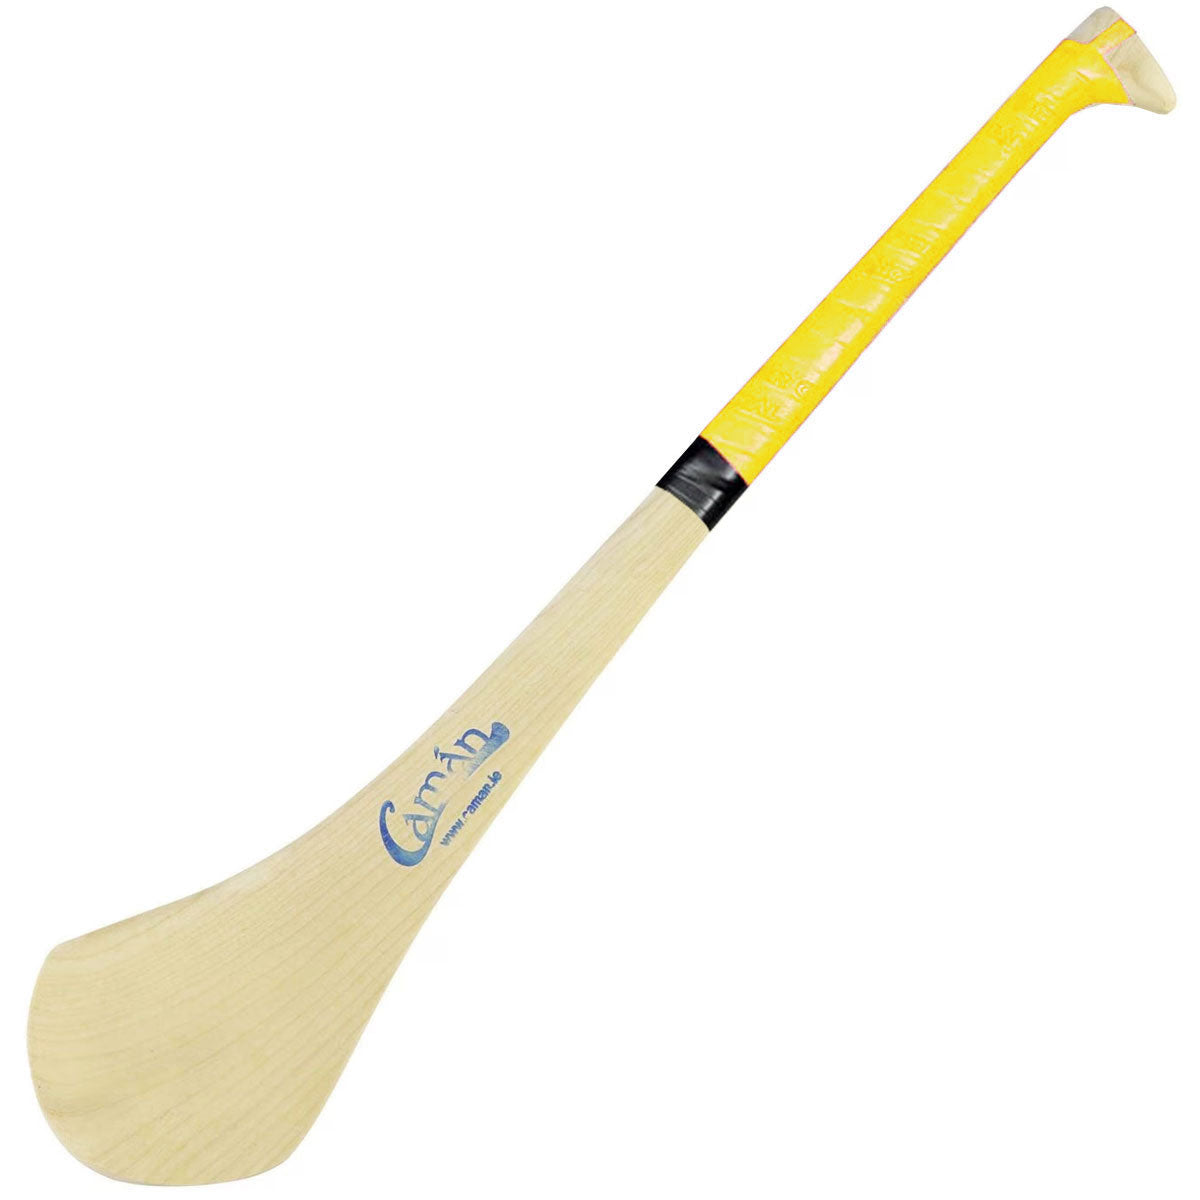 Caman Hurling Stick size 34 (Inches)